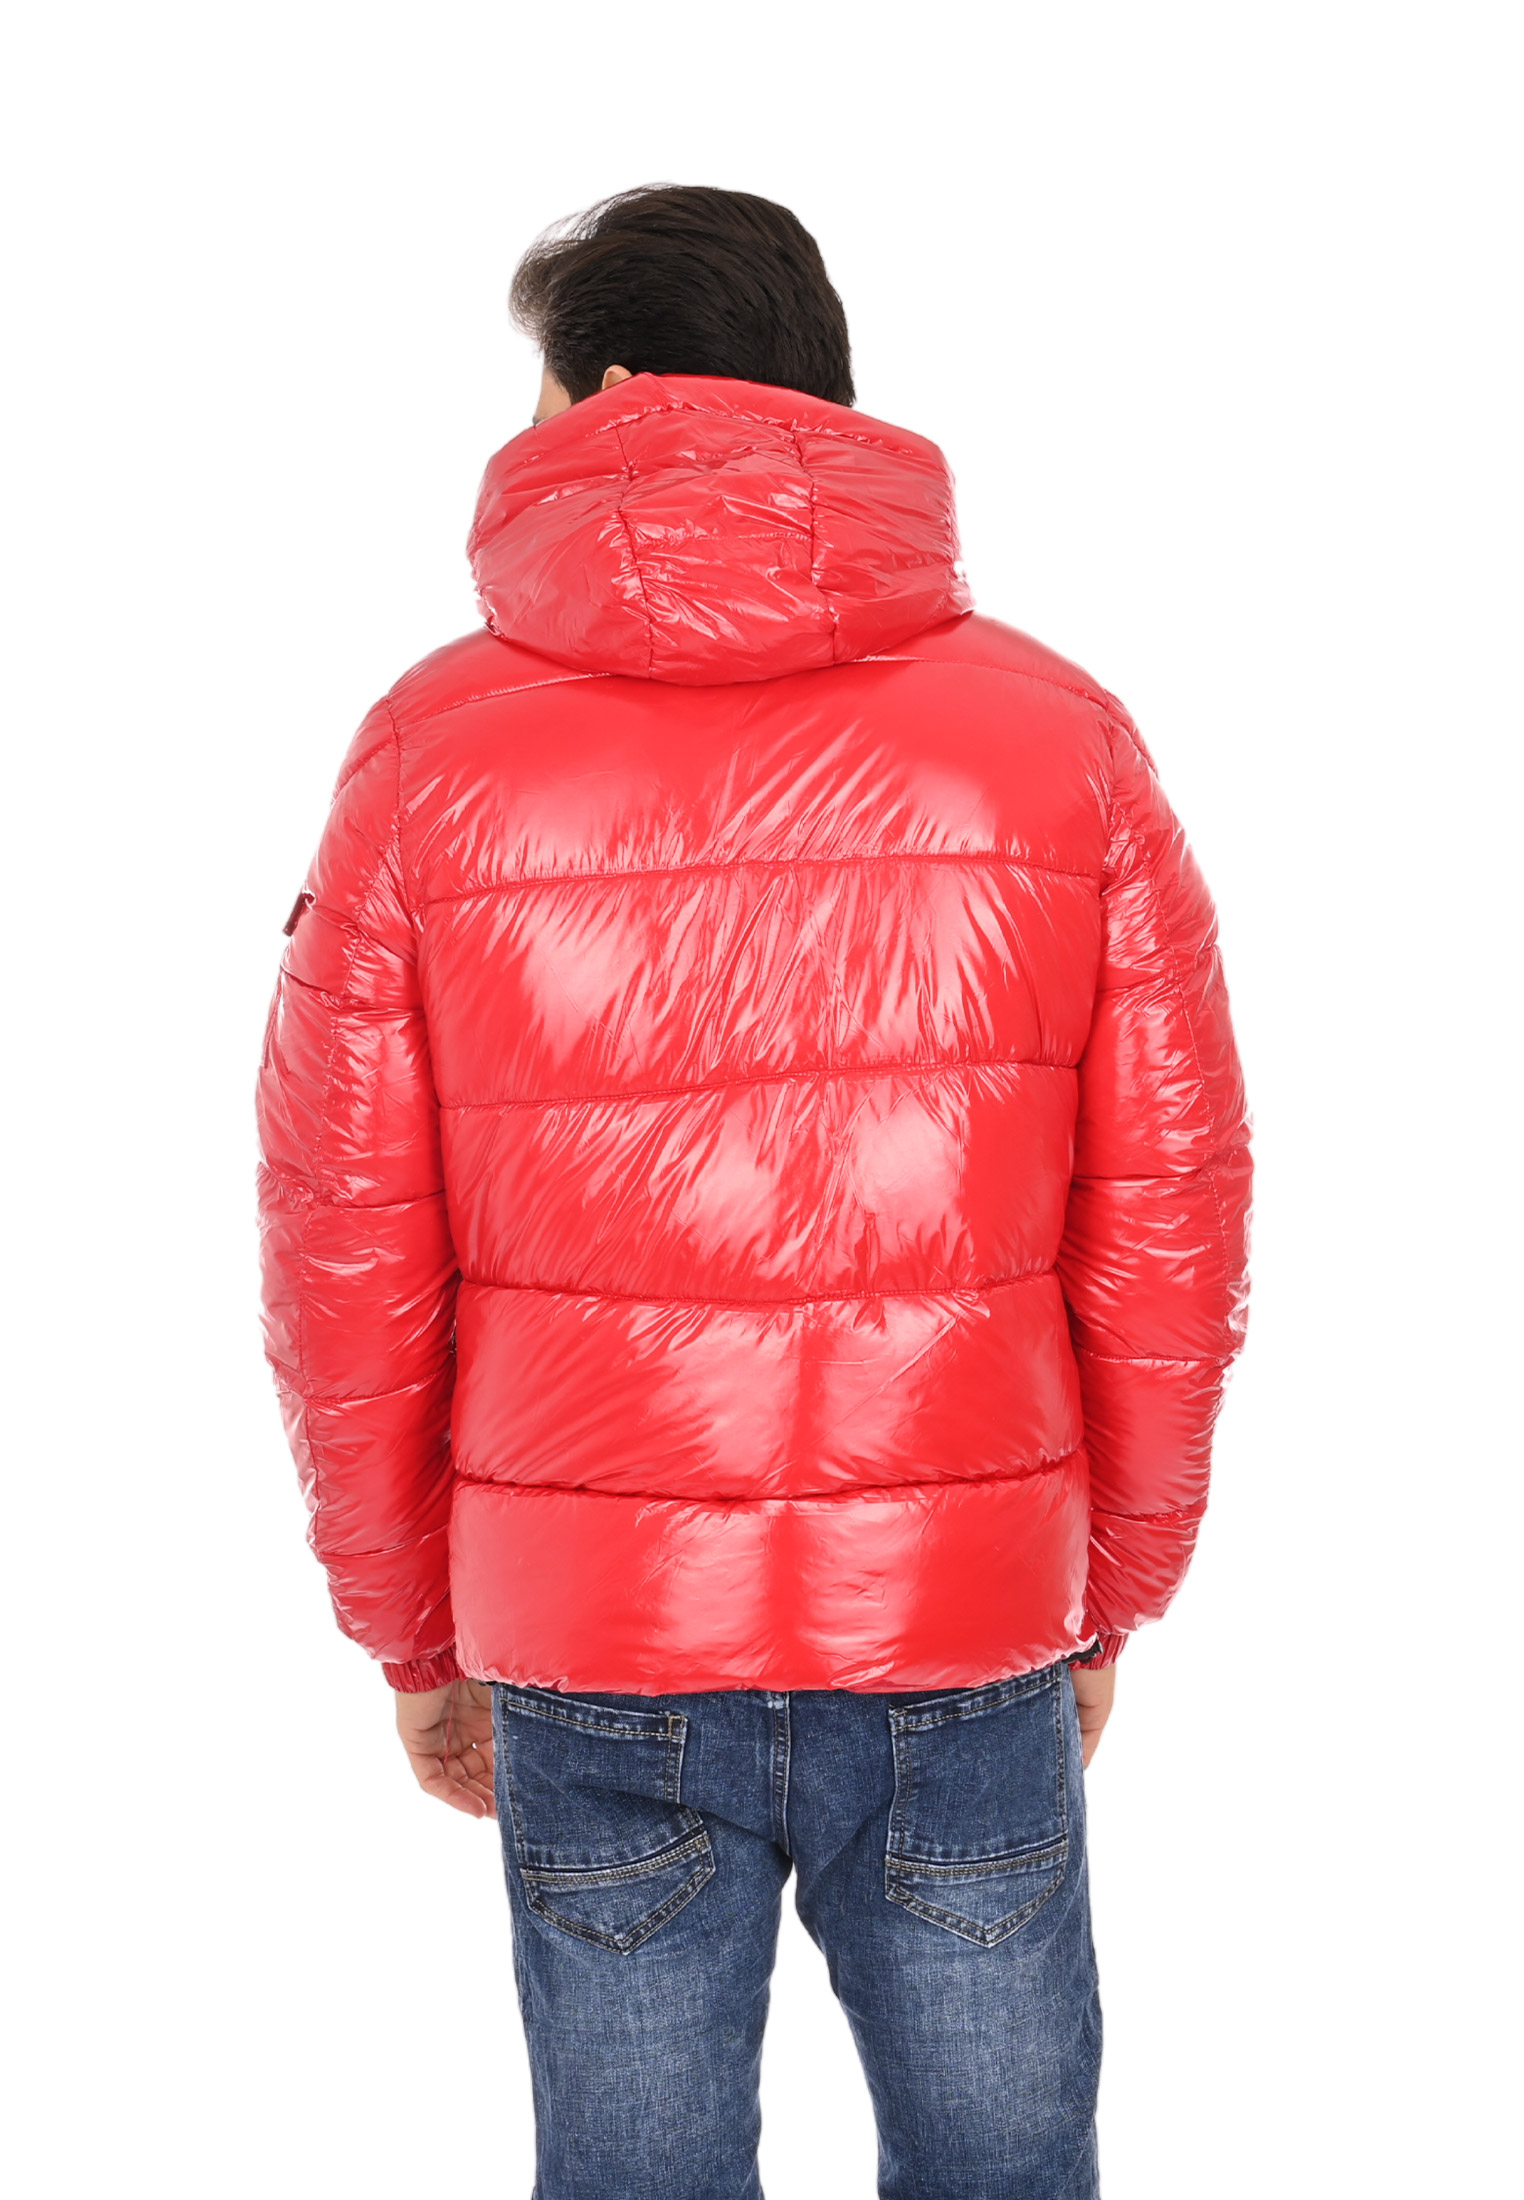 Men's Winter Jacket with Detachable Dub Glossy Bomber Paint